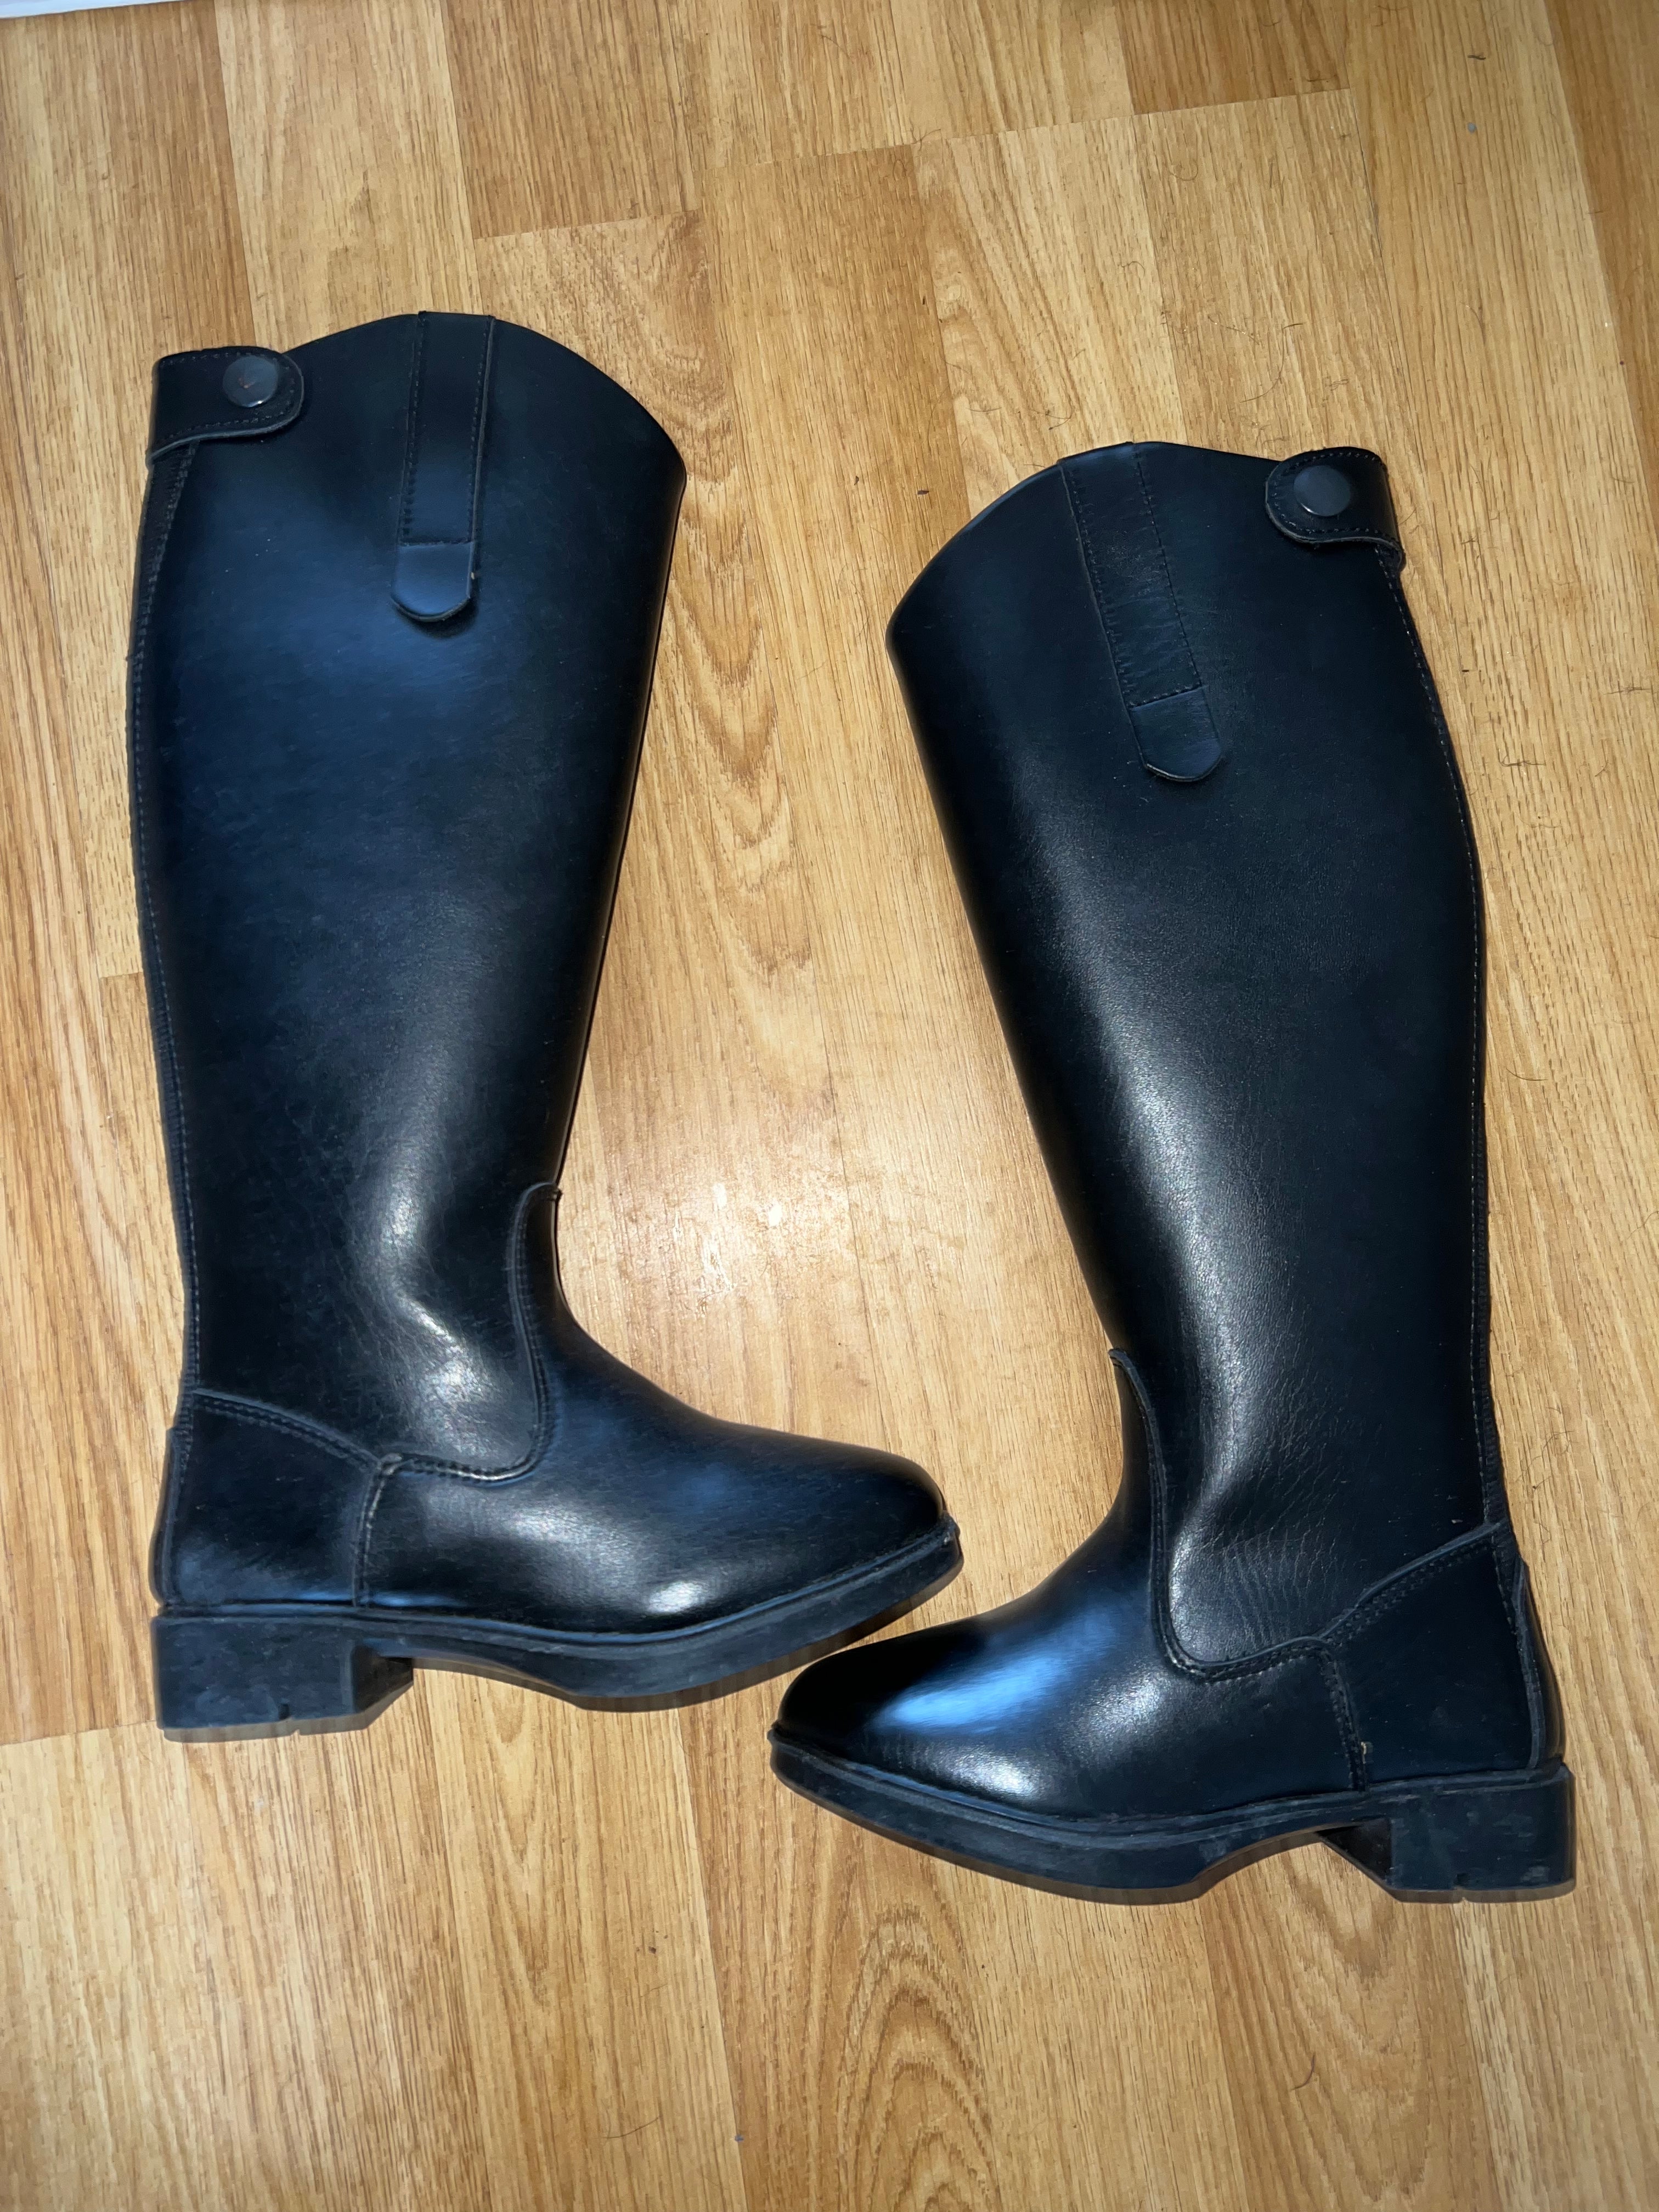 Sherwood Forest Childs Size 10 Riding Boots